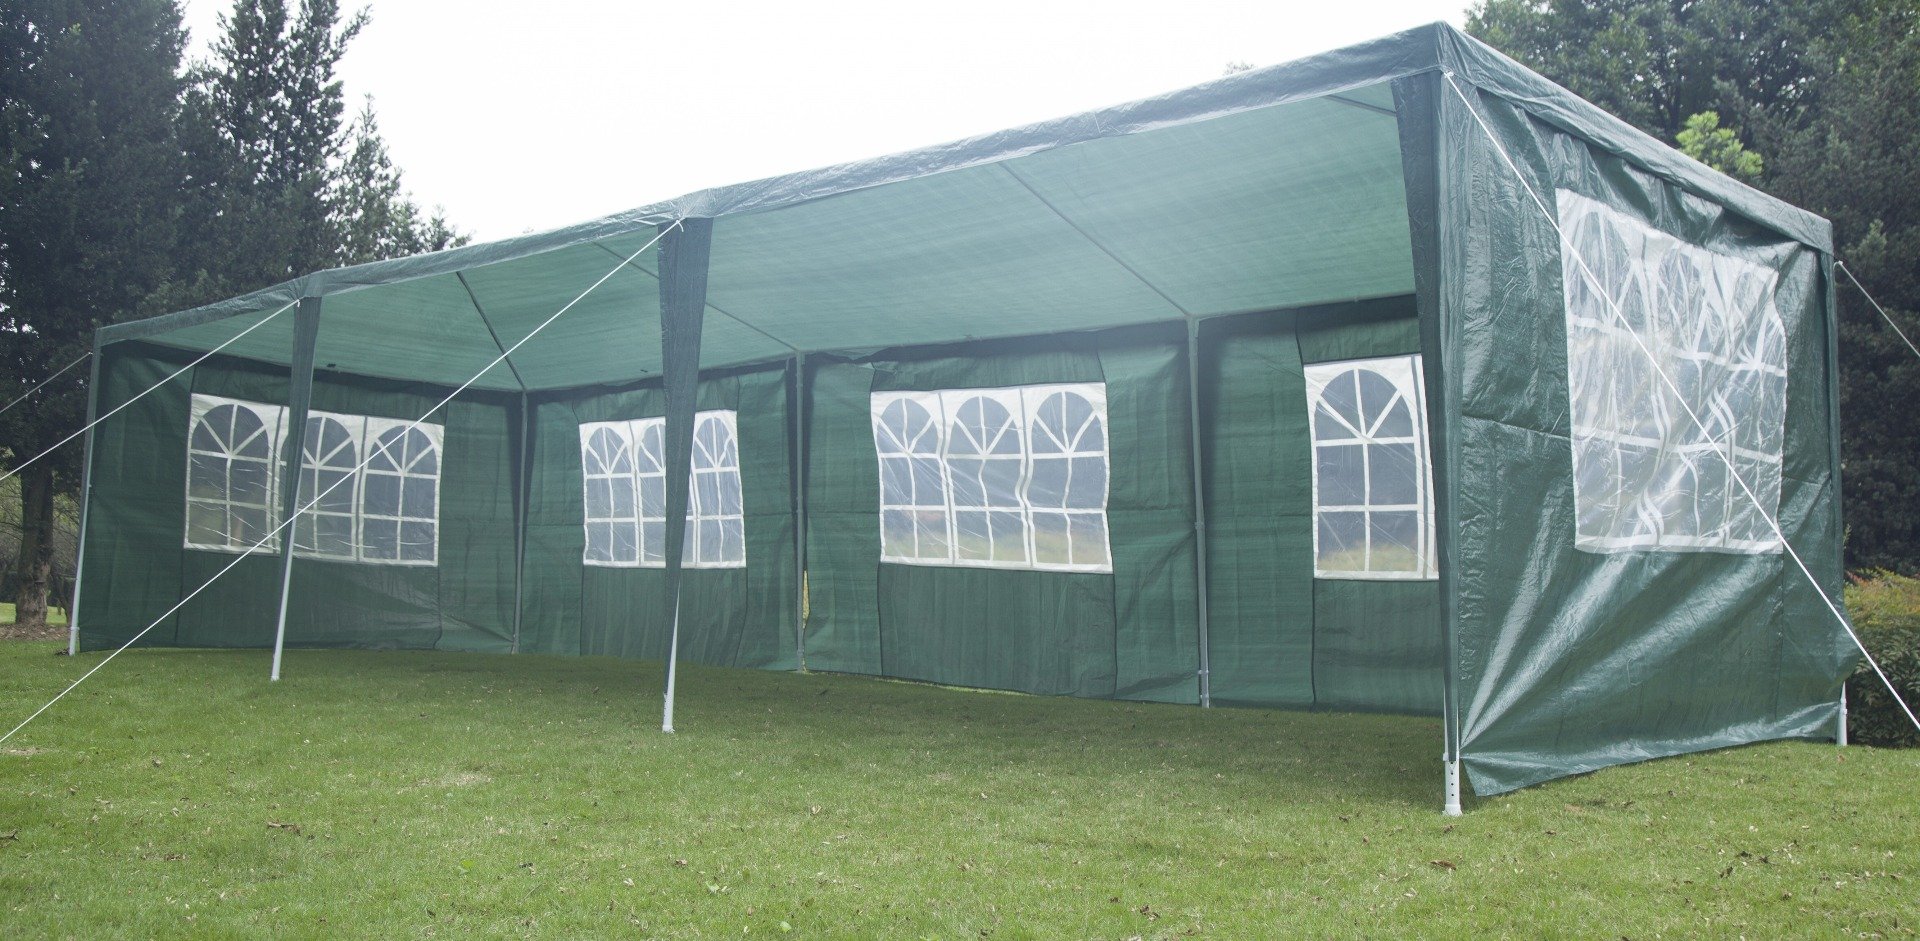 Shading 3x9m Wedding Outdoor Gazebo Marquee Tent Canopy Green